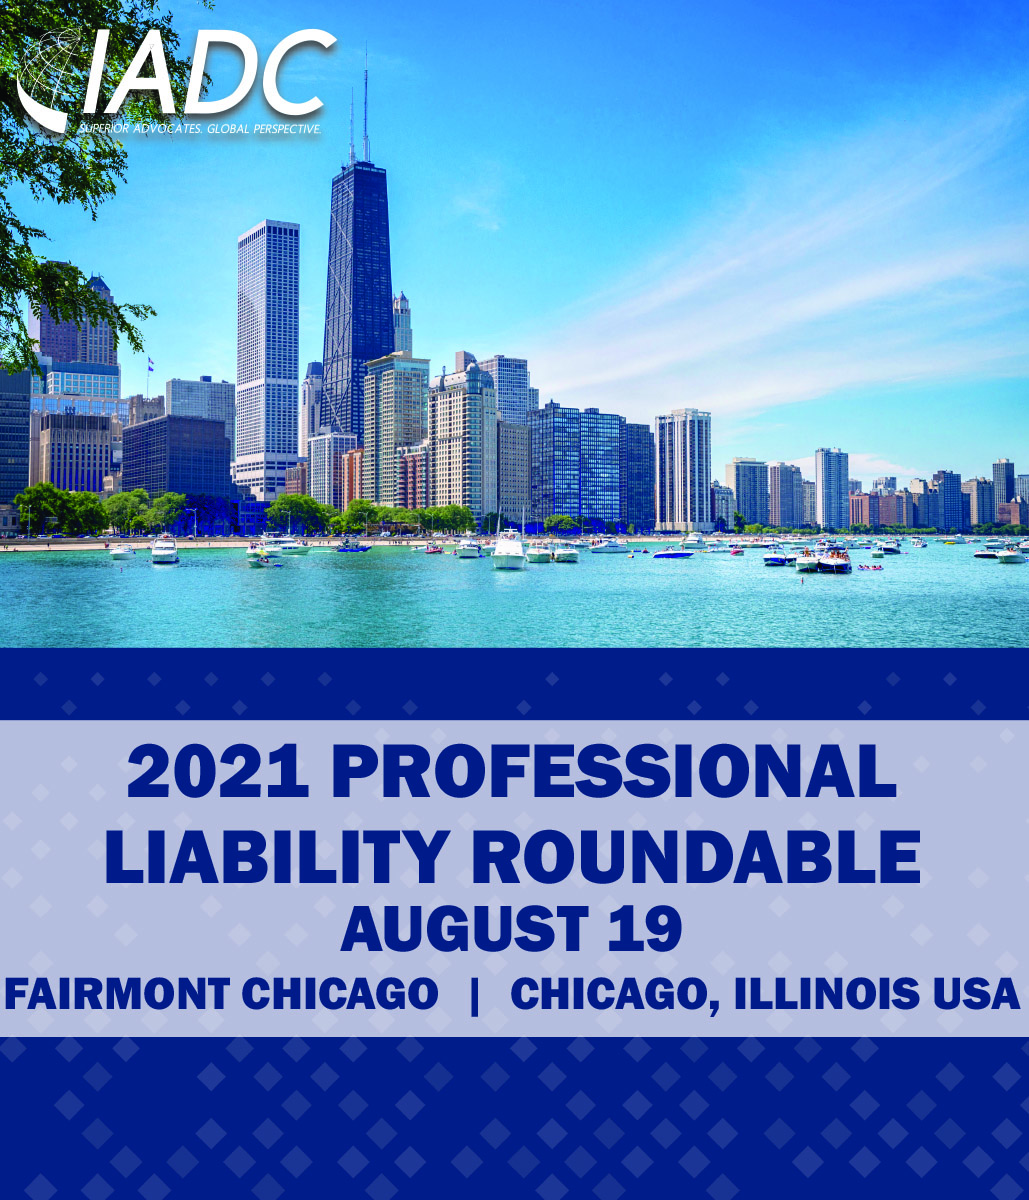 2021 Professional Liability Roundtable